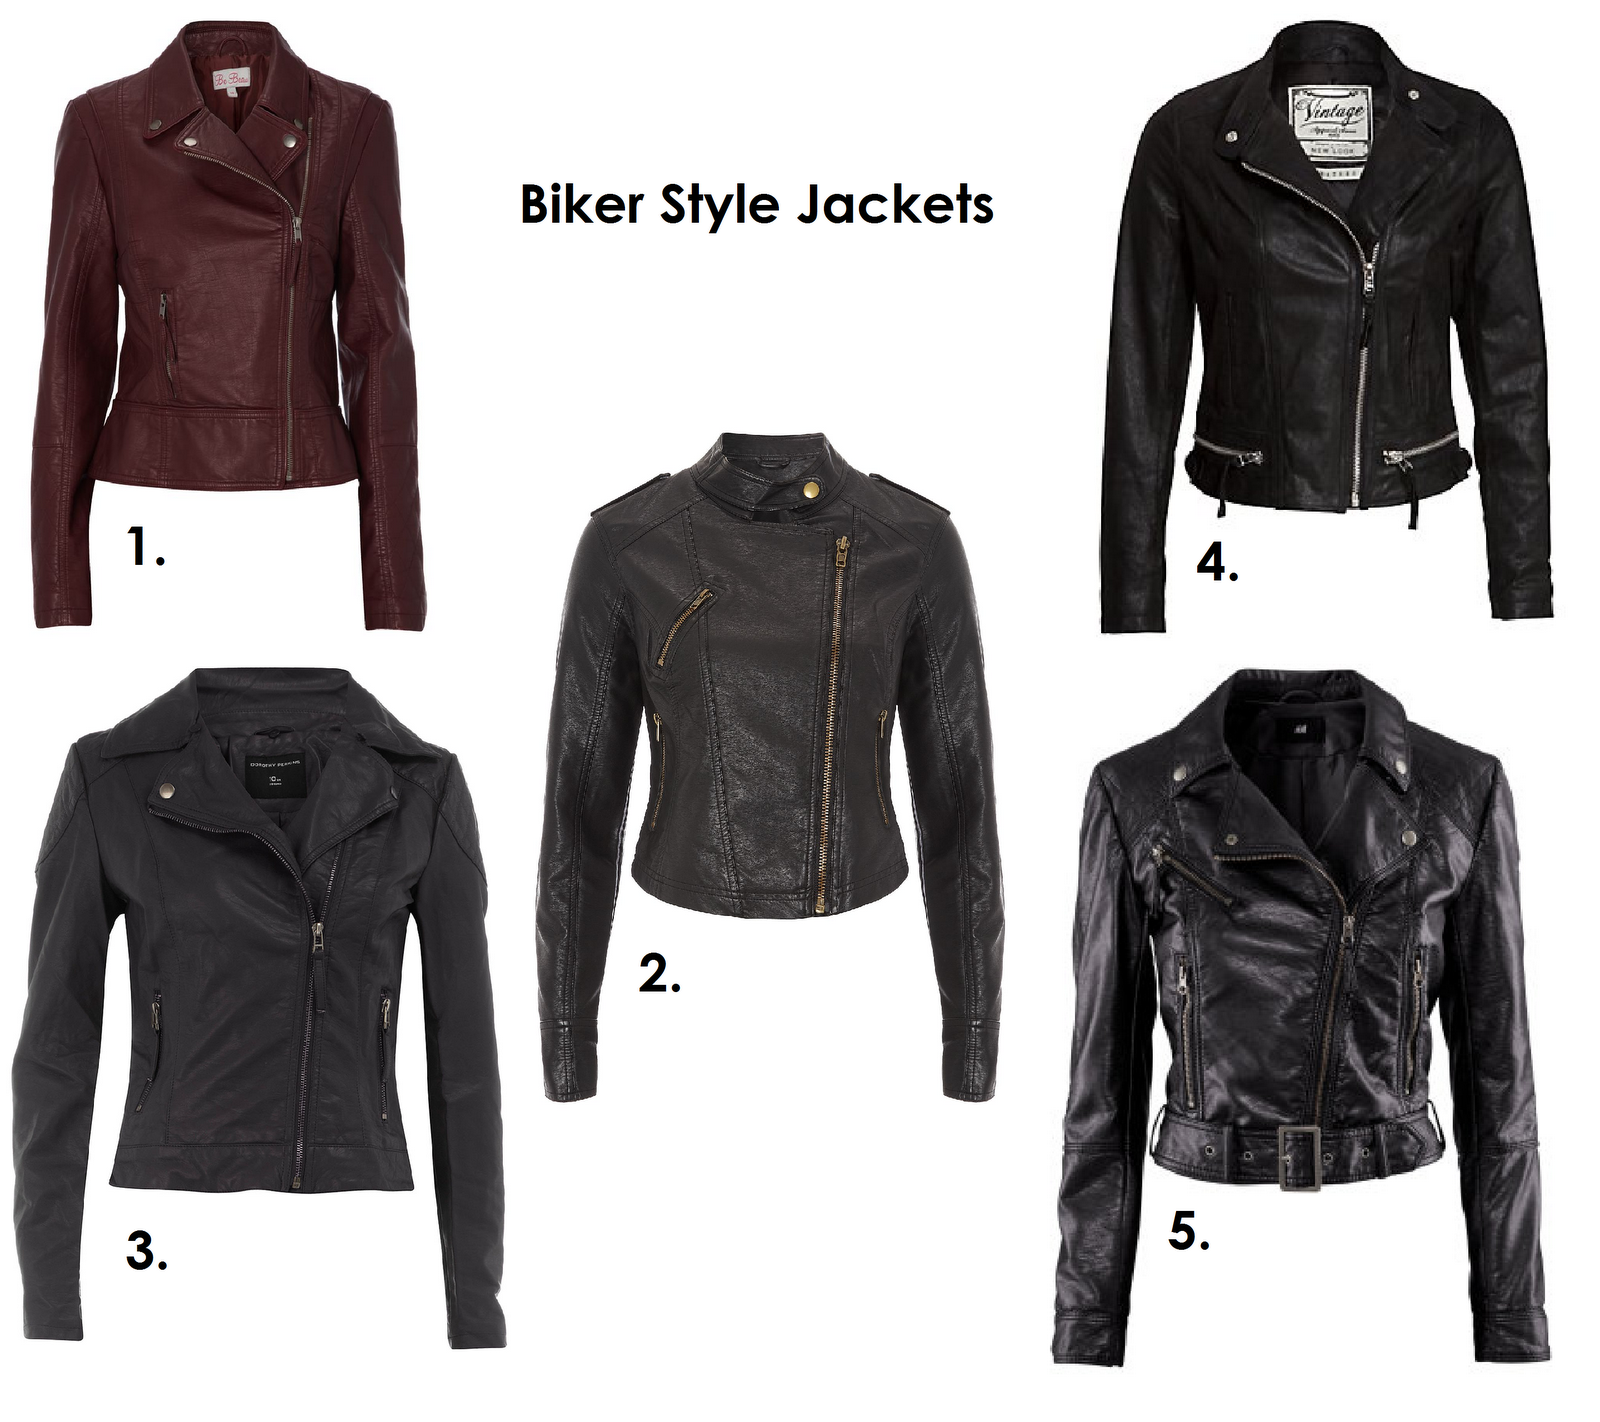 To be confirmed...: Purchase On A Whim: Biker Jacket